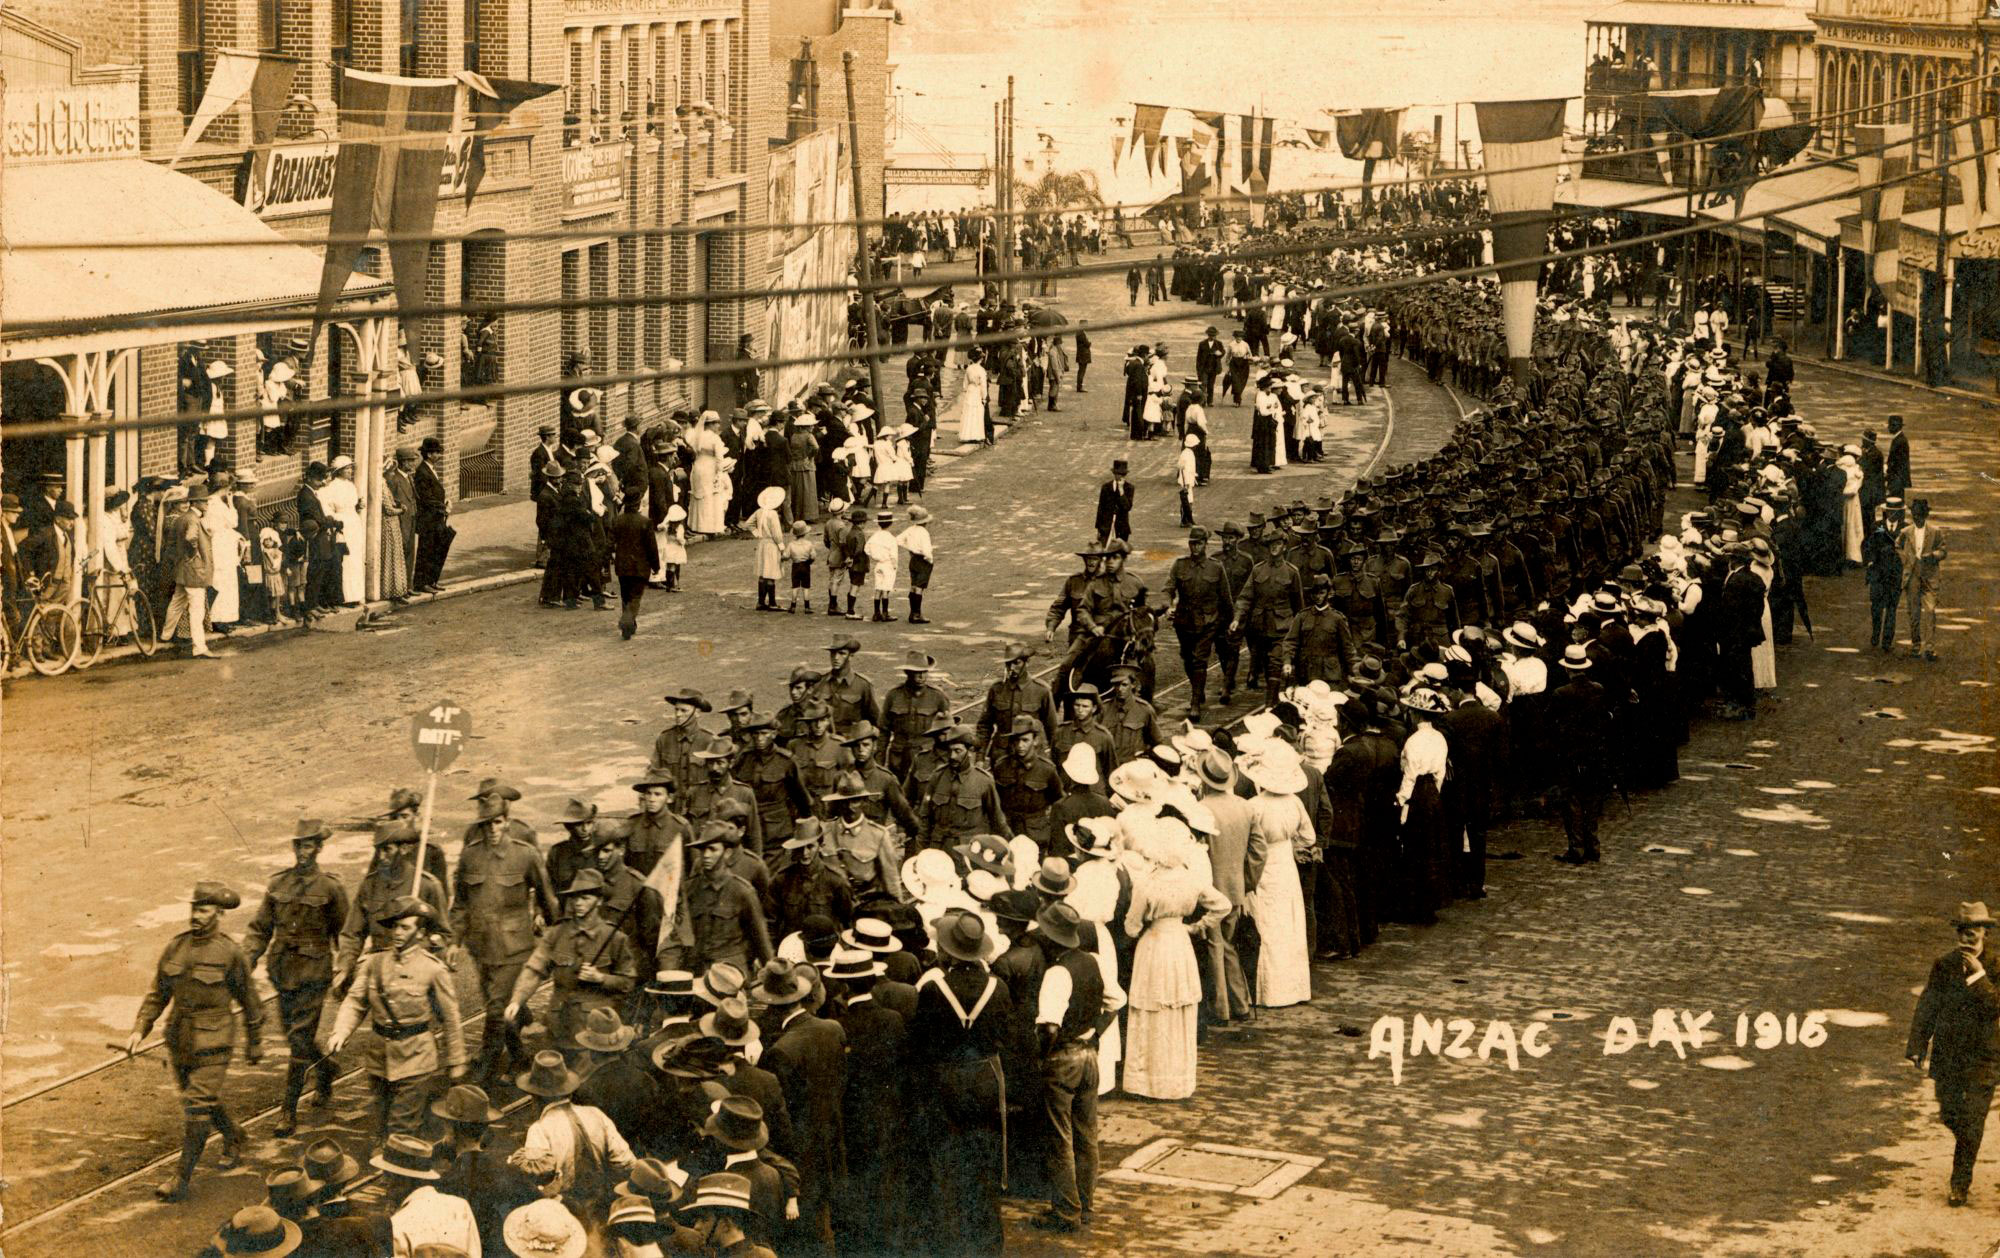 <p>Anzac Day procession through the streets of Brisbane, 1916</p>
